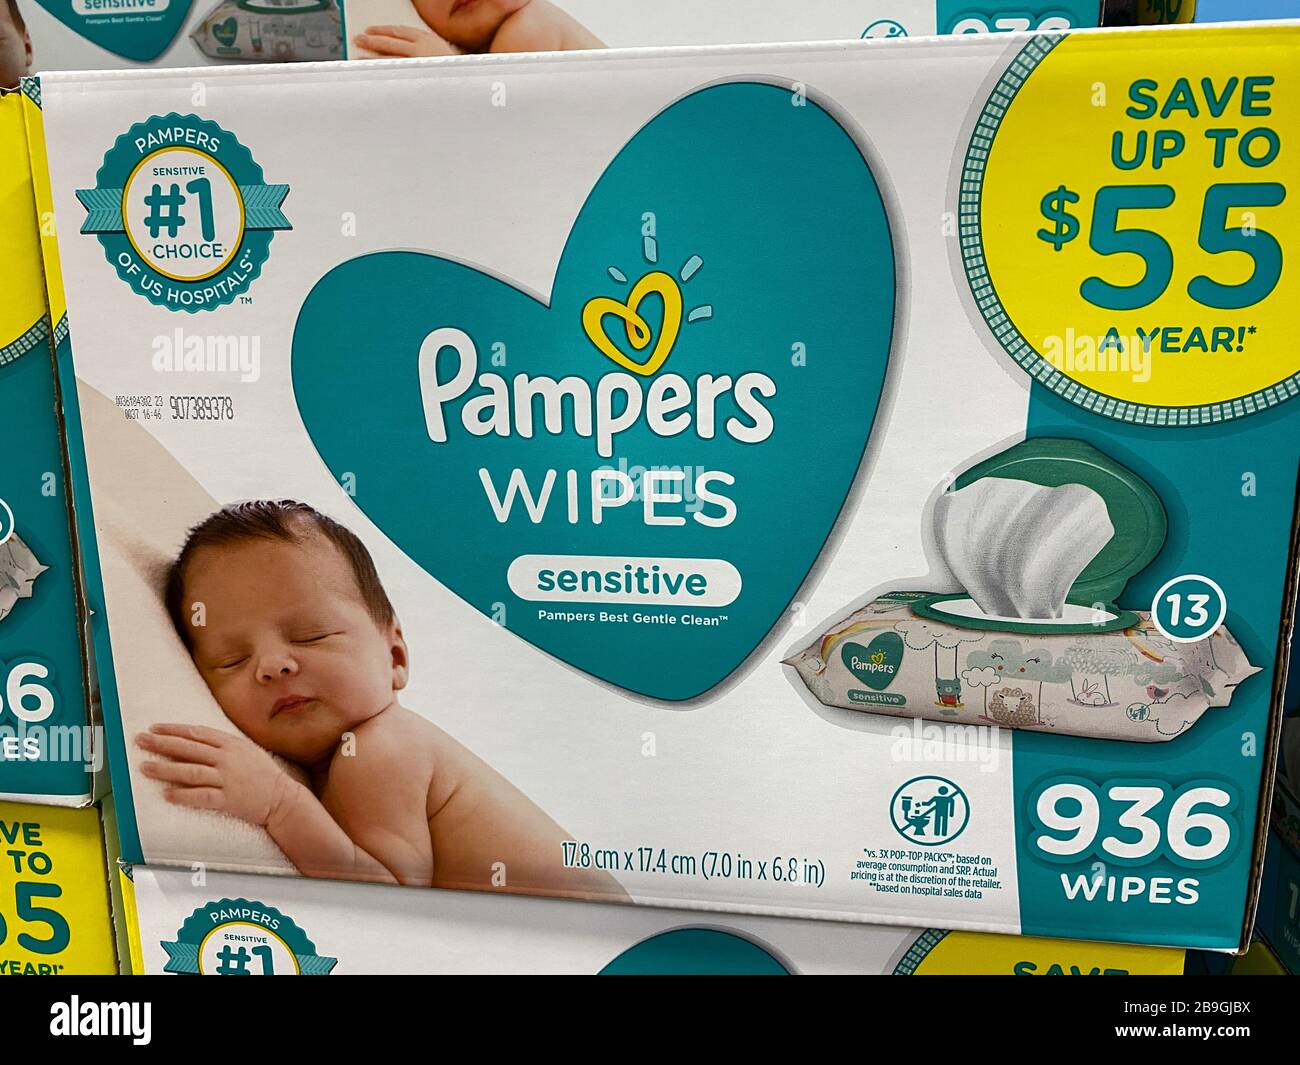 Orlando,FL/USA - 3/7/20: A box of Pampers Sensitive Baby Wipes in the baby  aisle at a Sams Club wholesale retail store Stock Photo - Alamy